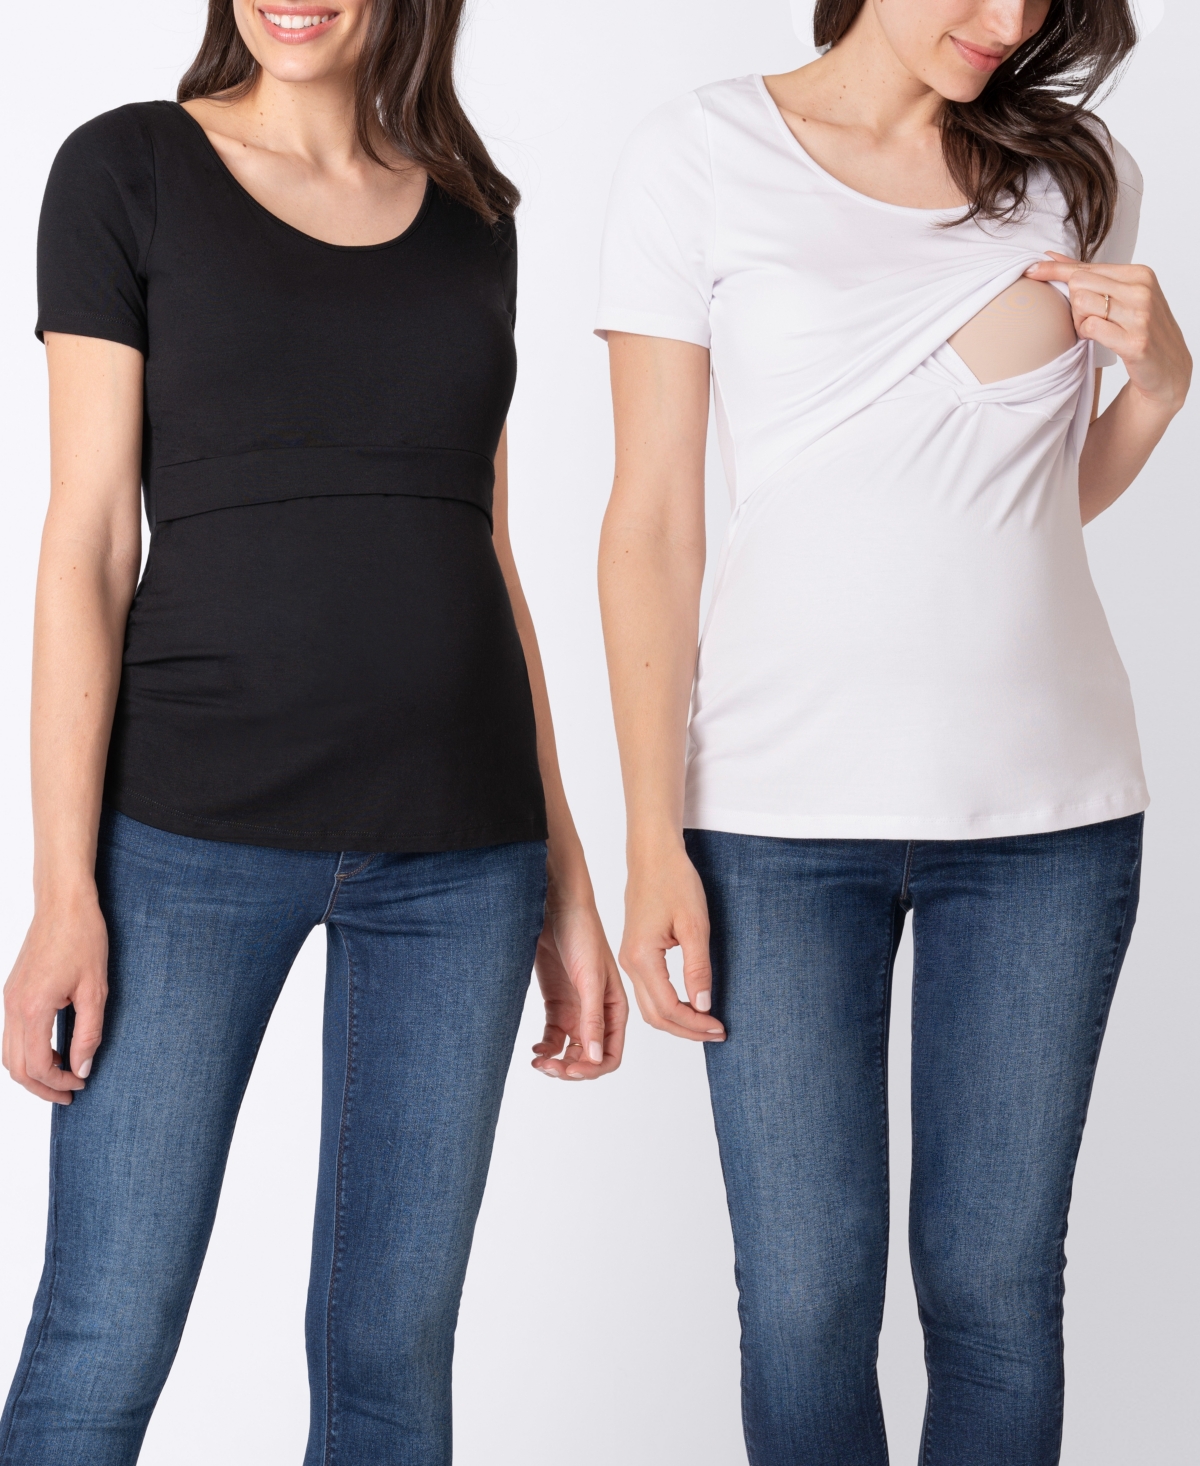 Seraphine Women's Maternity & Nursing Long Sleeve Tops - Twin Pack Black &  White at  Women's Clothing store